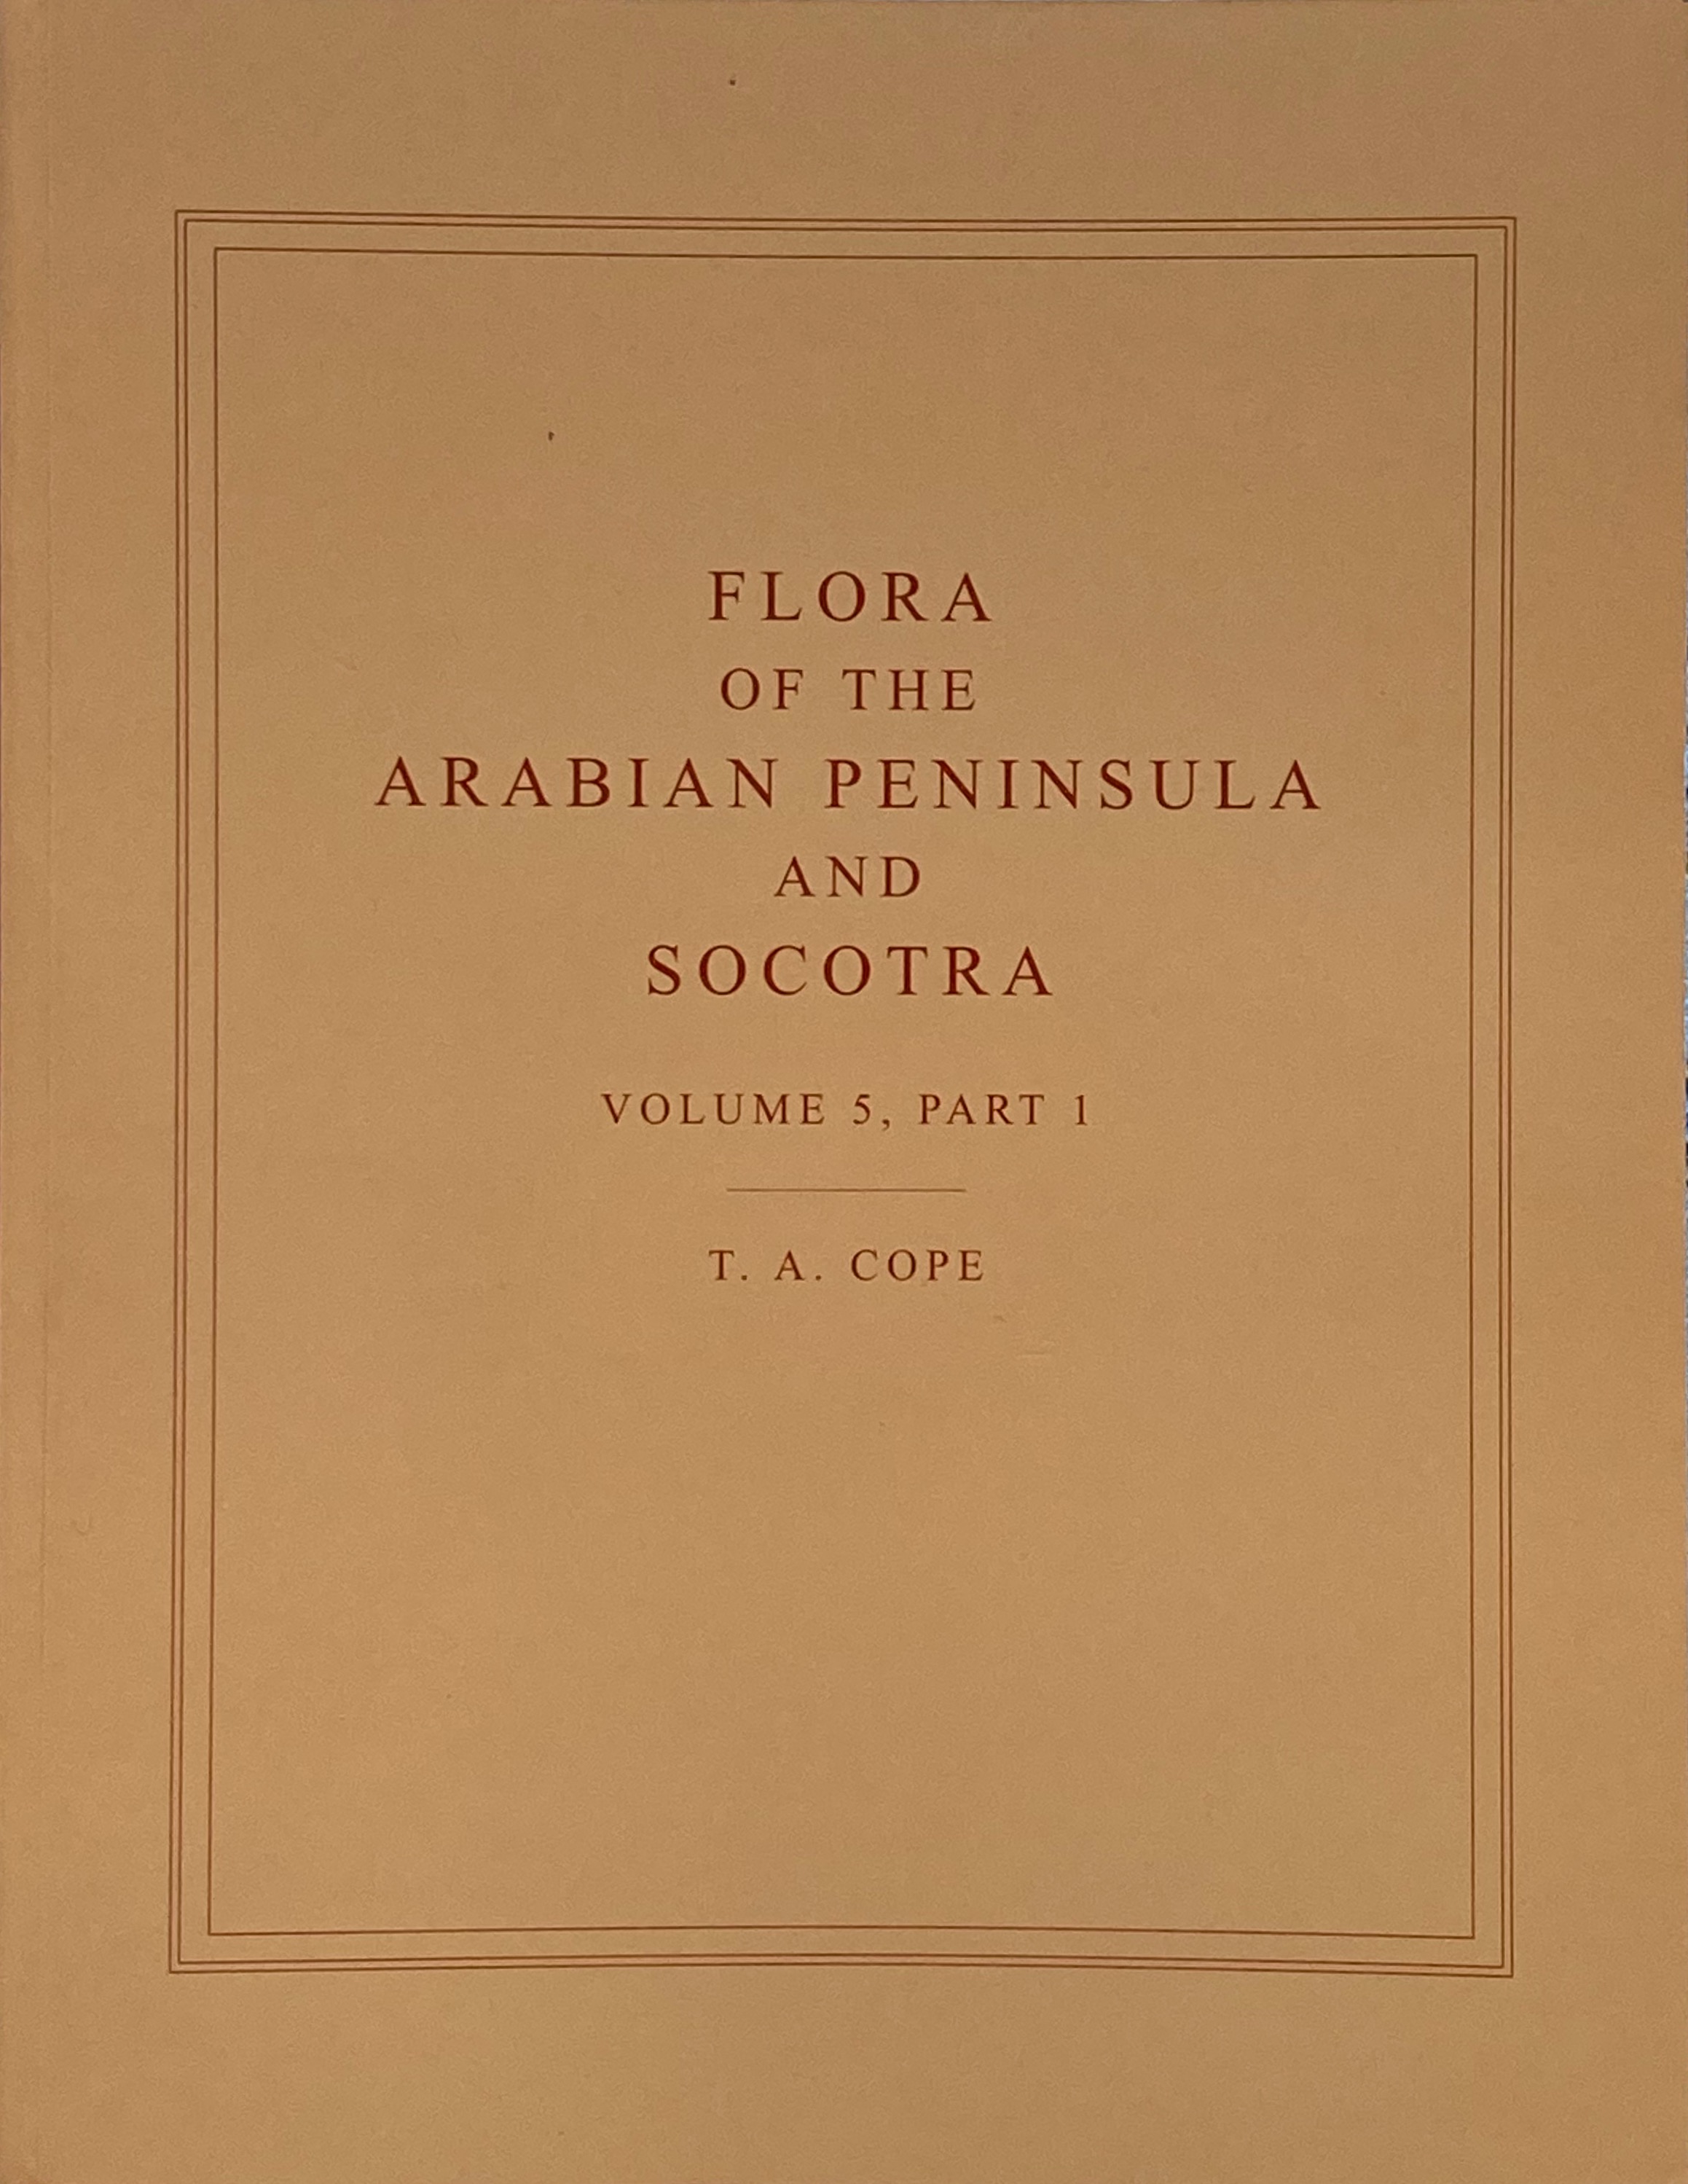 Flora of the Arabian Peninsula and Socotra (vol. 5 part 1 only) - Cope, Thomas A.